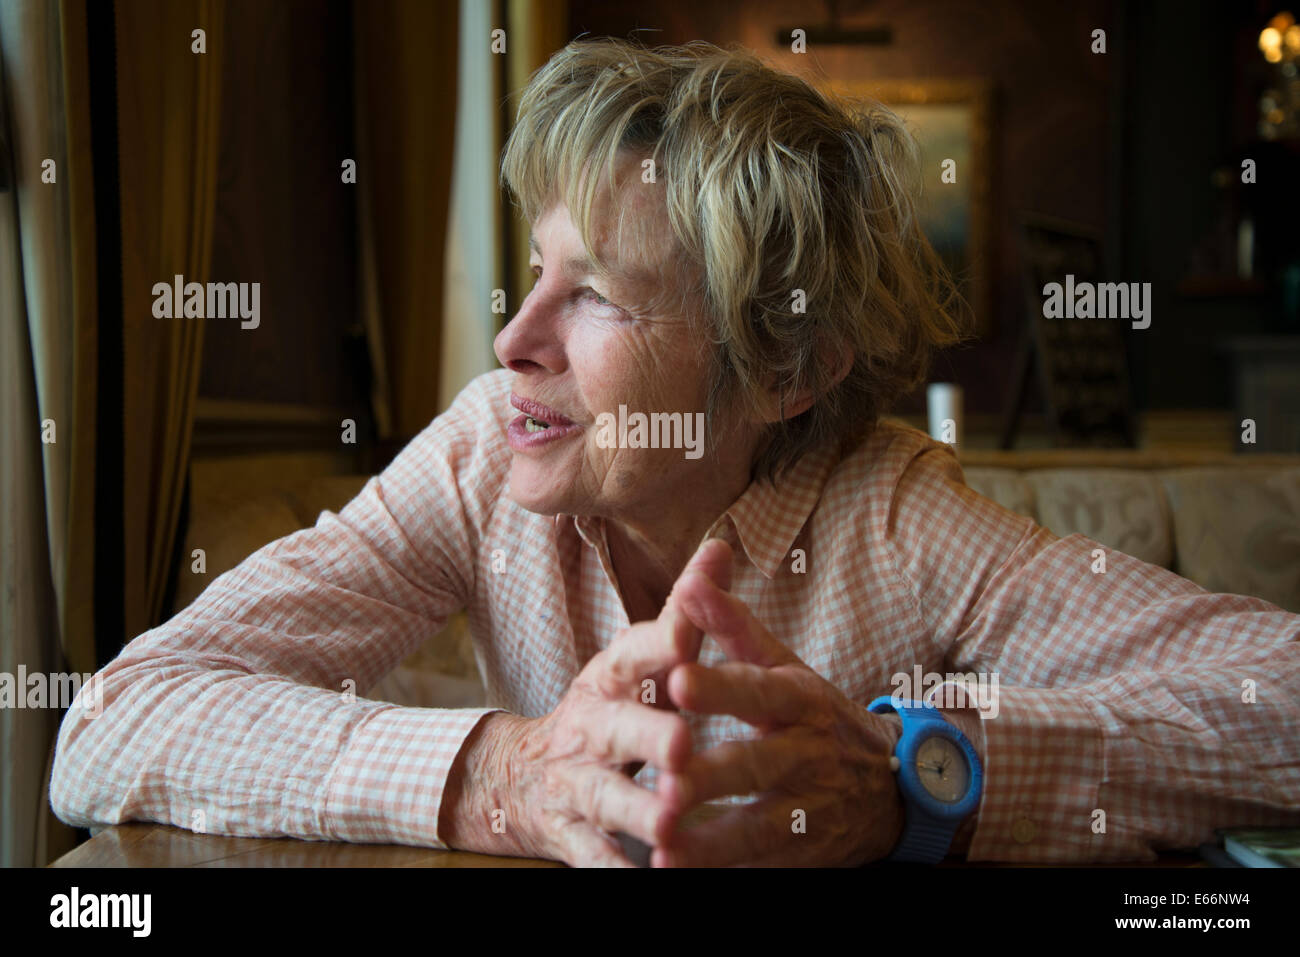 Elderly woman looking out of the window smiling Stock Photo